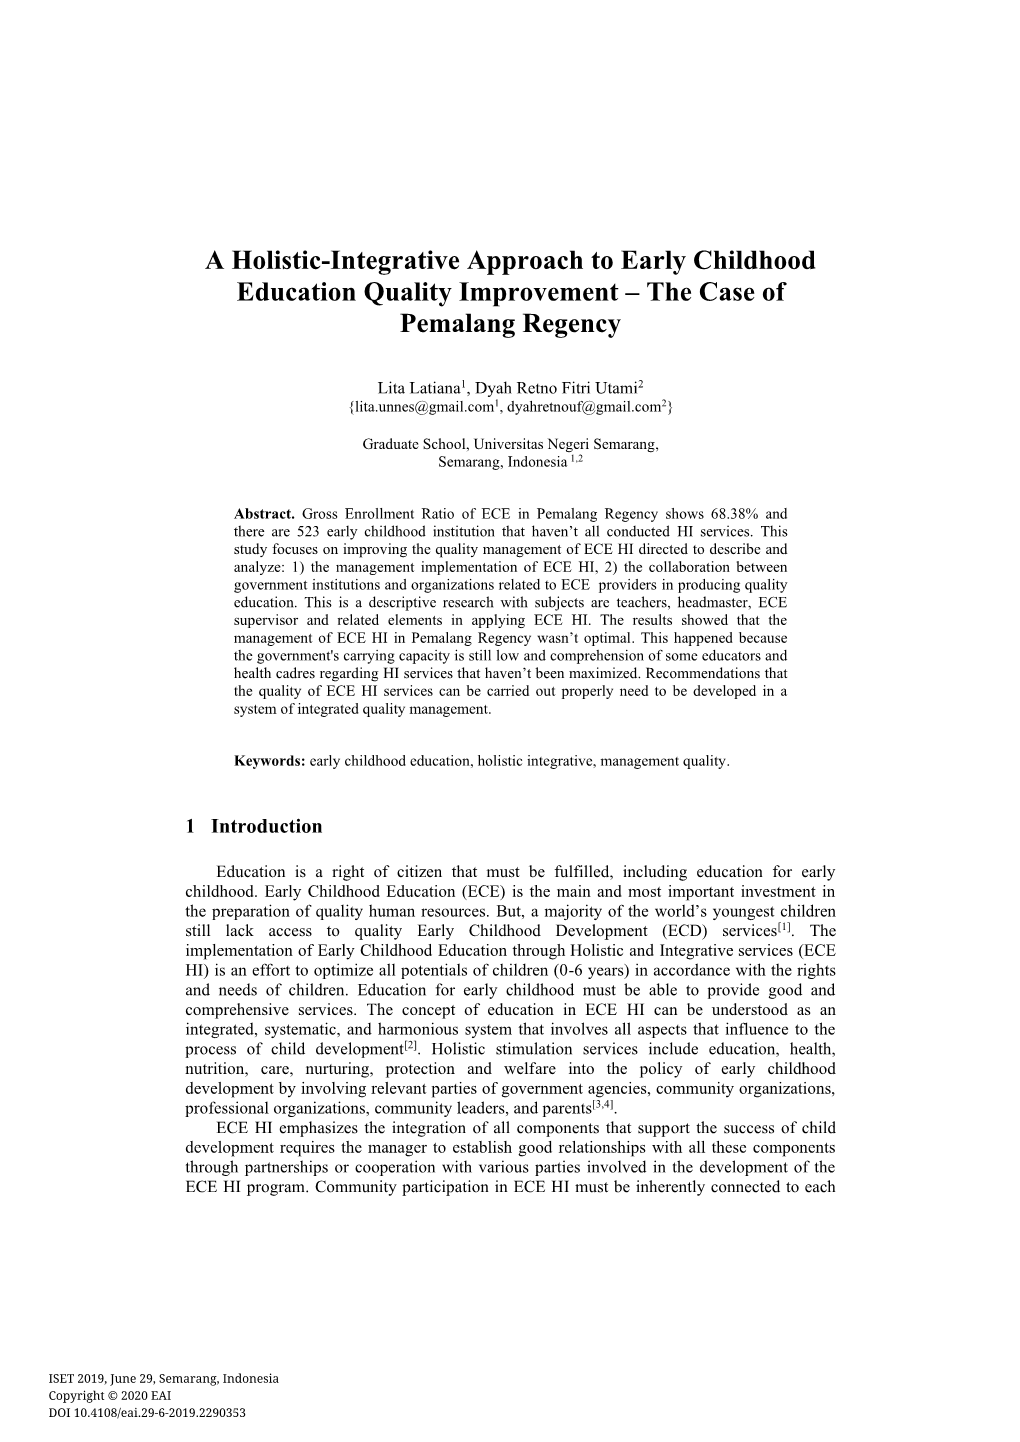 A Holistic-Integrative Approach to Early Childhood Education Quality Improvement – the Case of Pemalang Regency